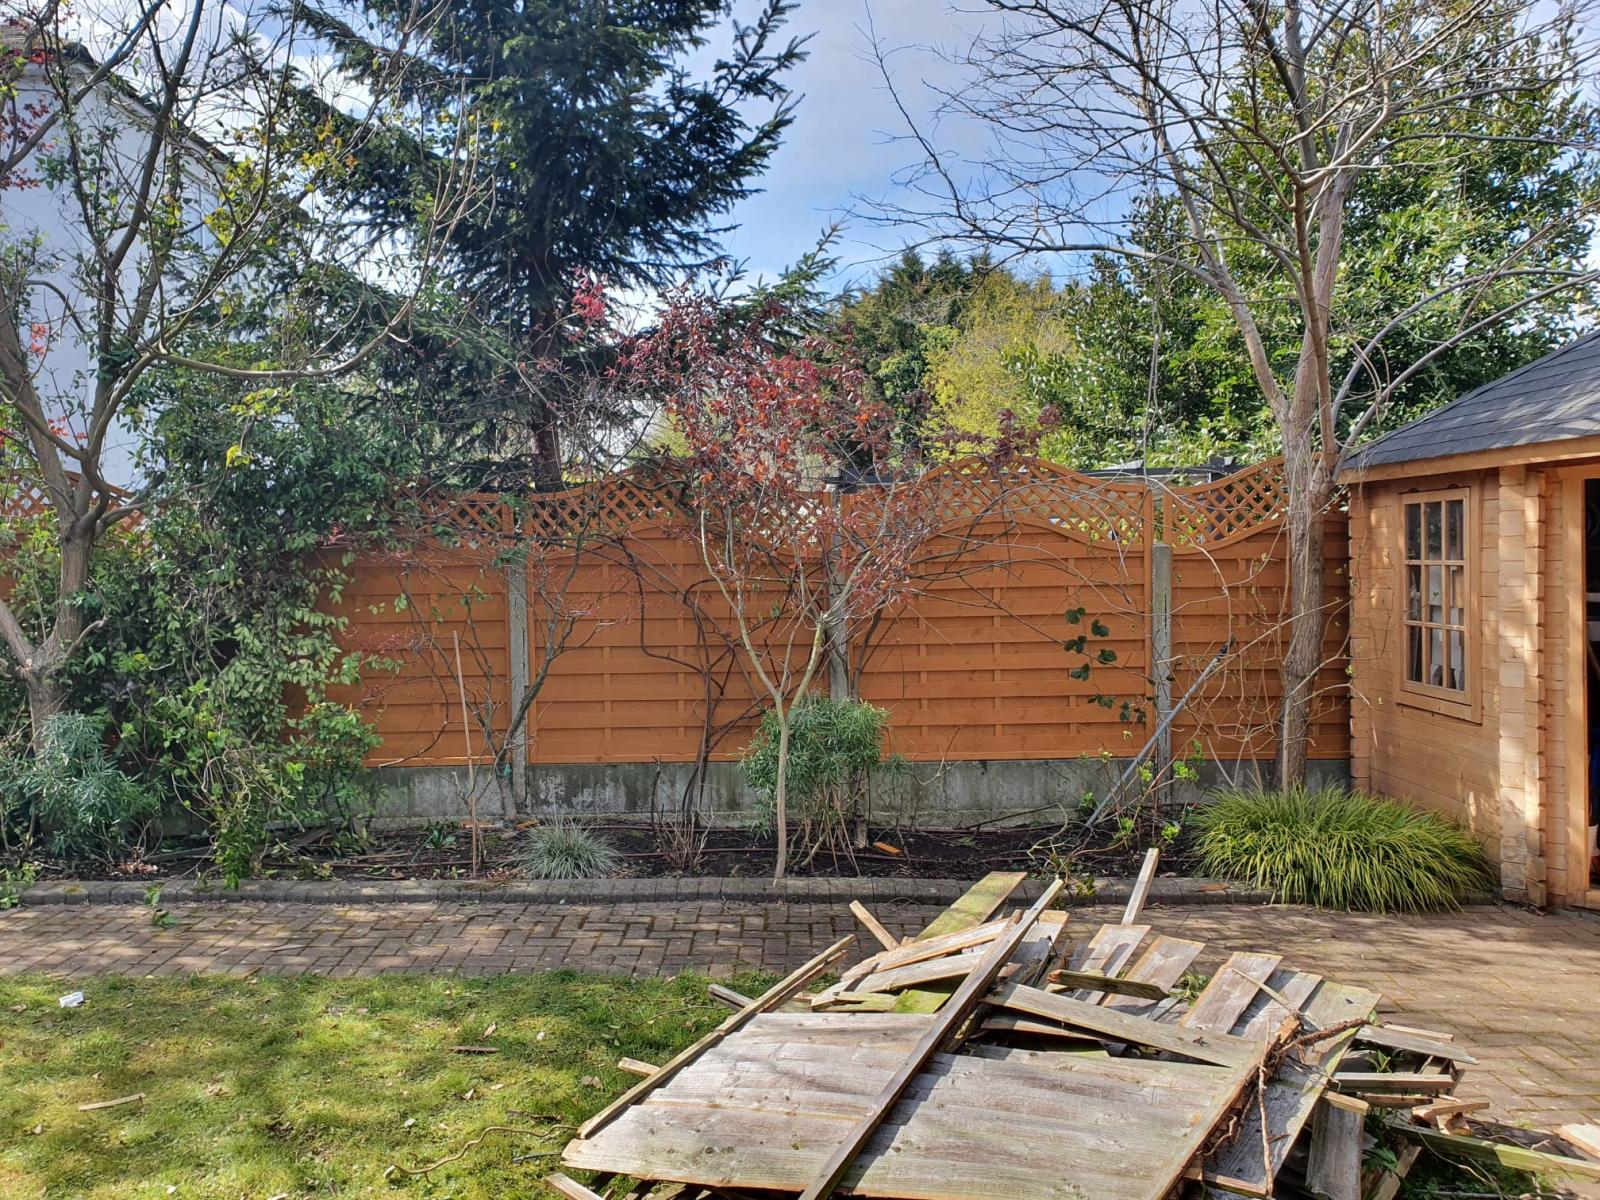 London Garden Fencing Experts by Happy Services London